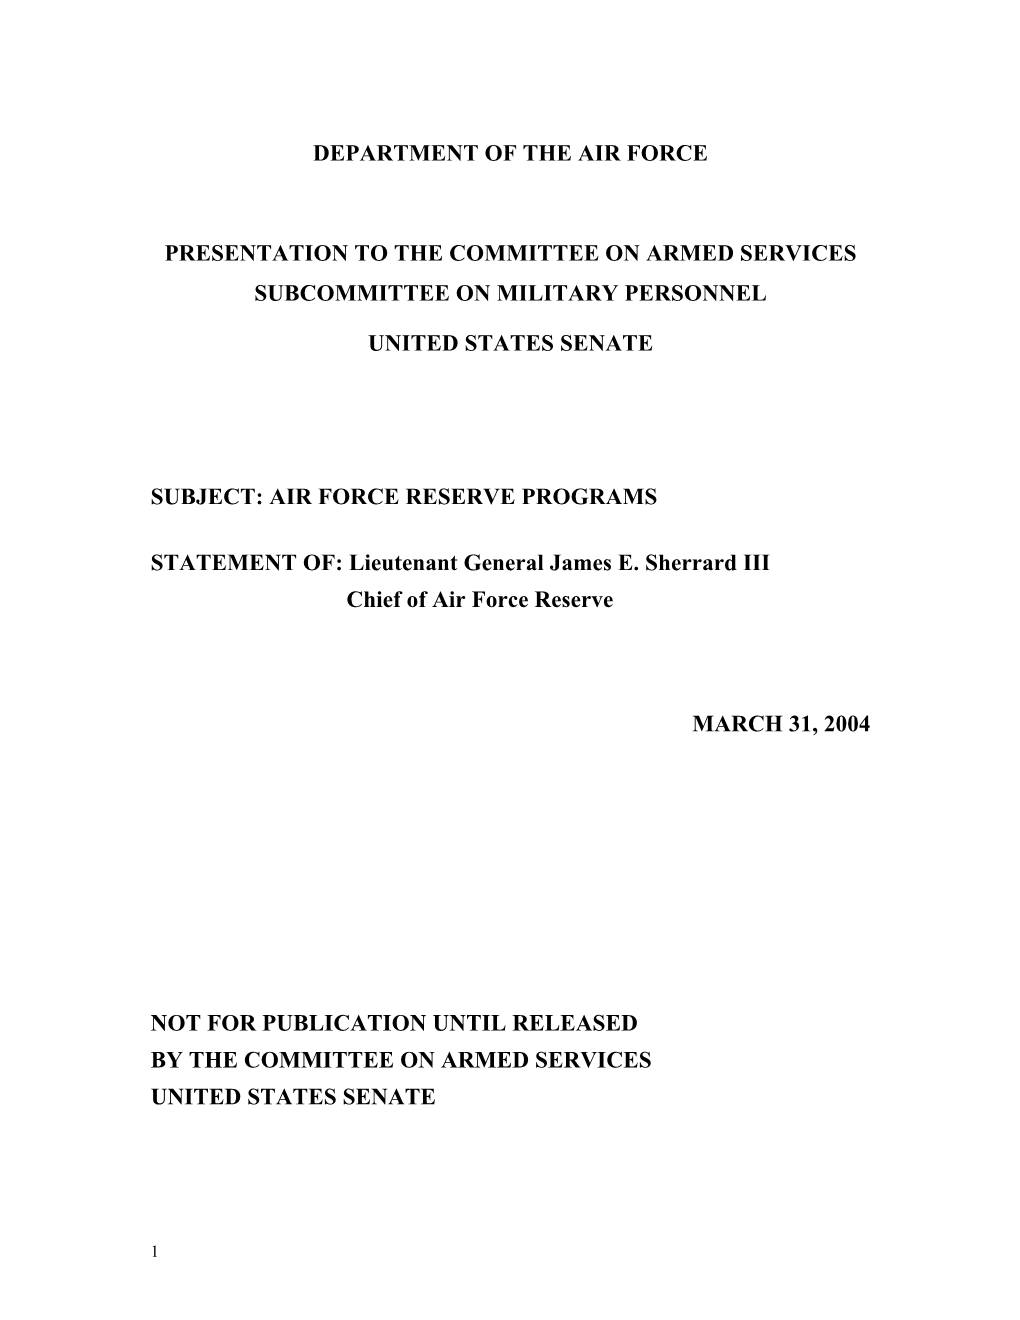 Department of the Air Force Presentation to the Committee on Armed Services Subcommittee on Military Personnel United States